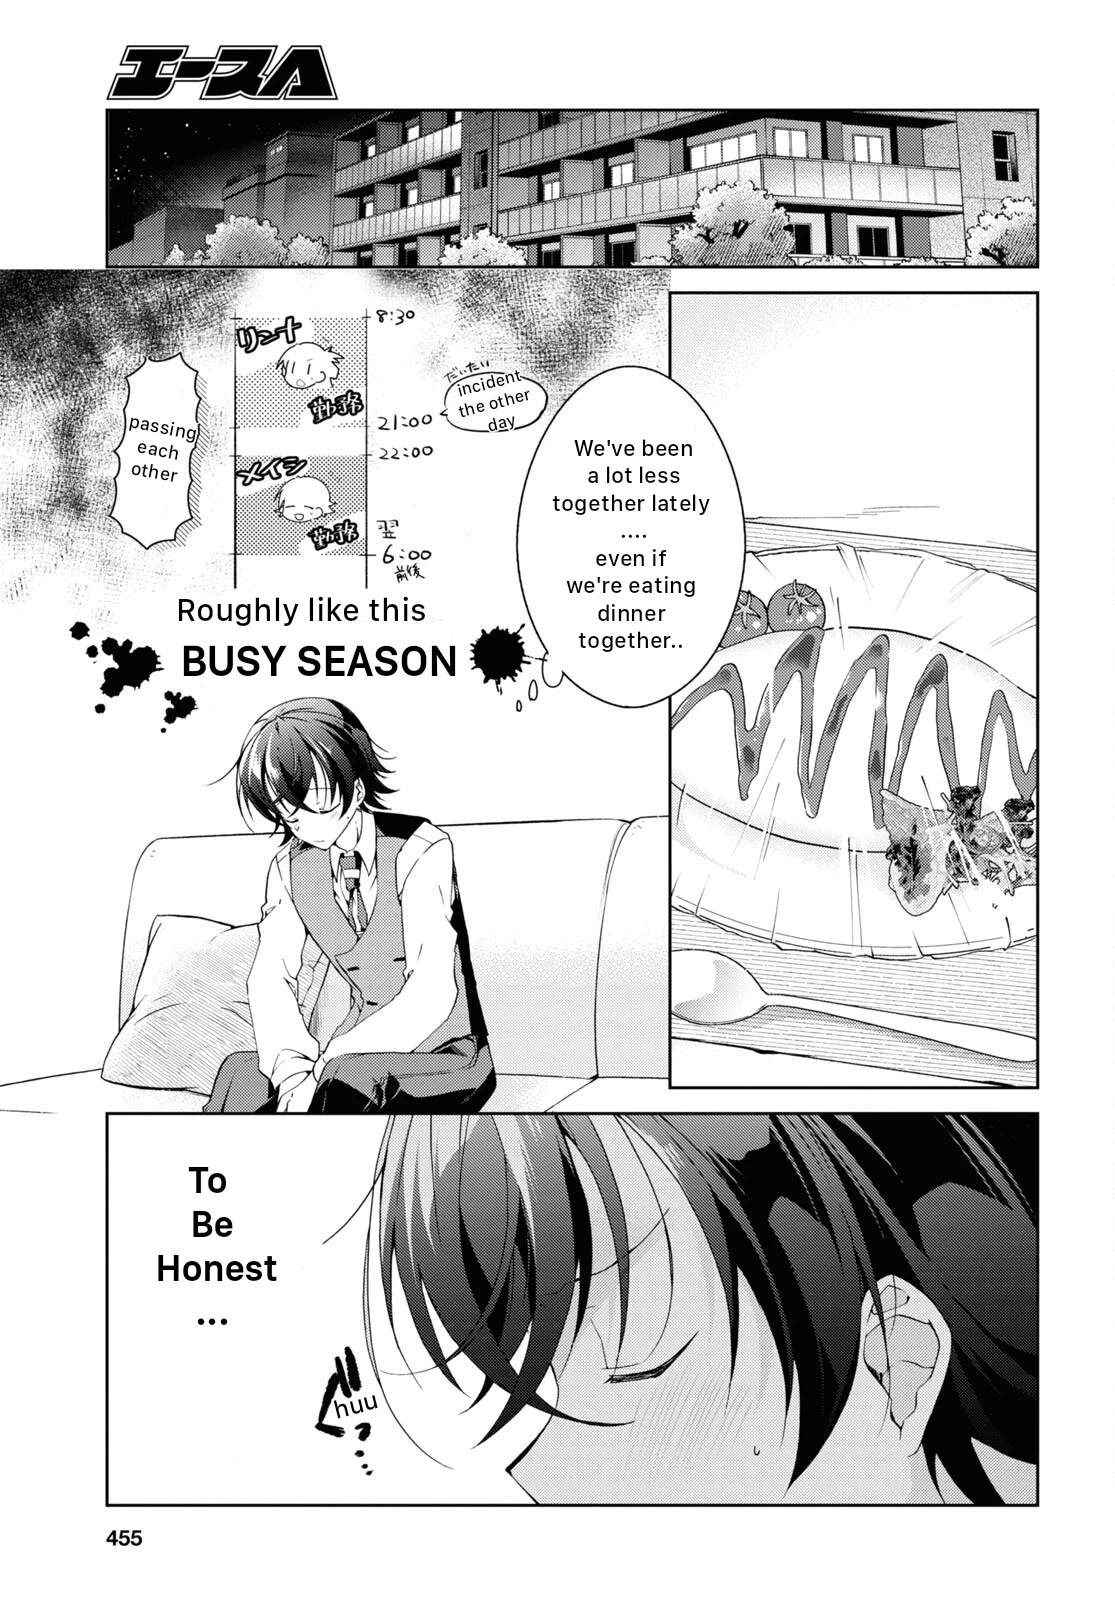 Isshiki-san Wants to Know About Love. - chapter 22 - #5